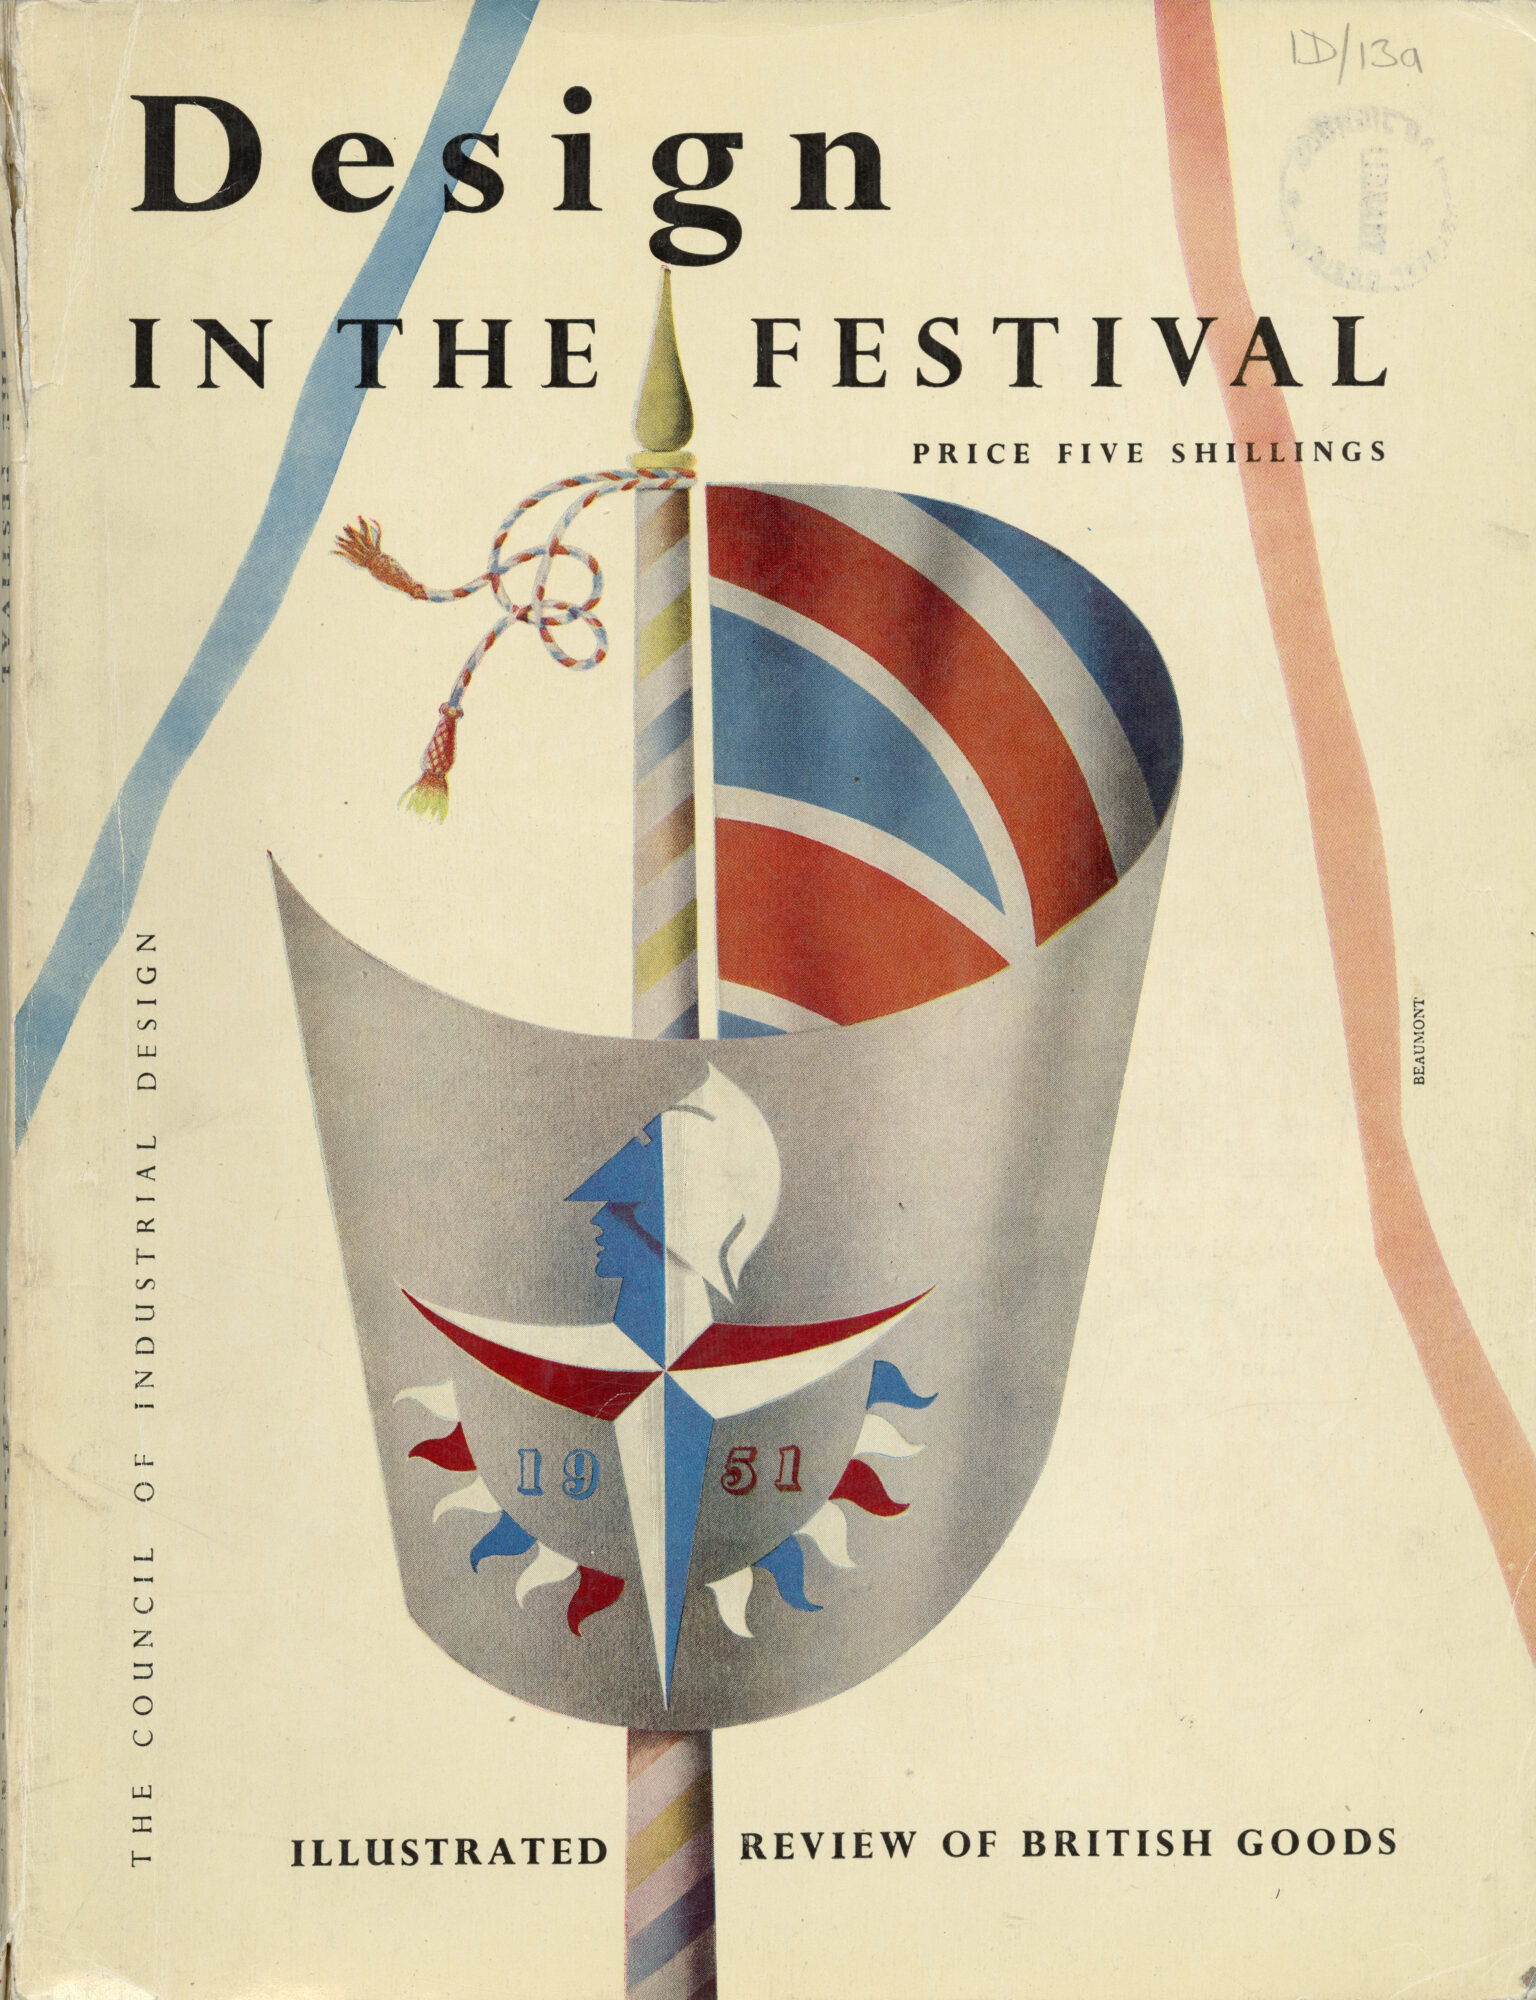 Cover of Design in the Festival magazine showing a flagpole design with British flag and Festival of Britain logo, 1951